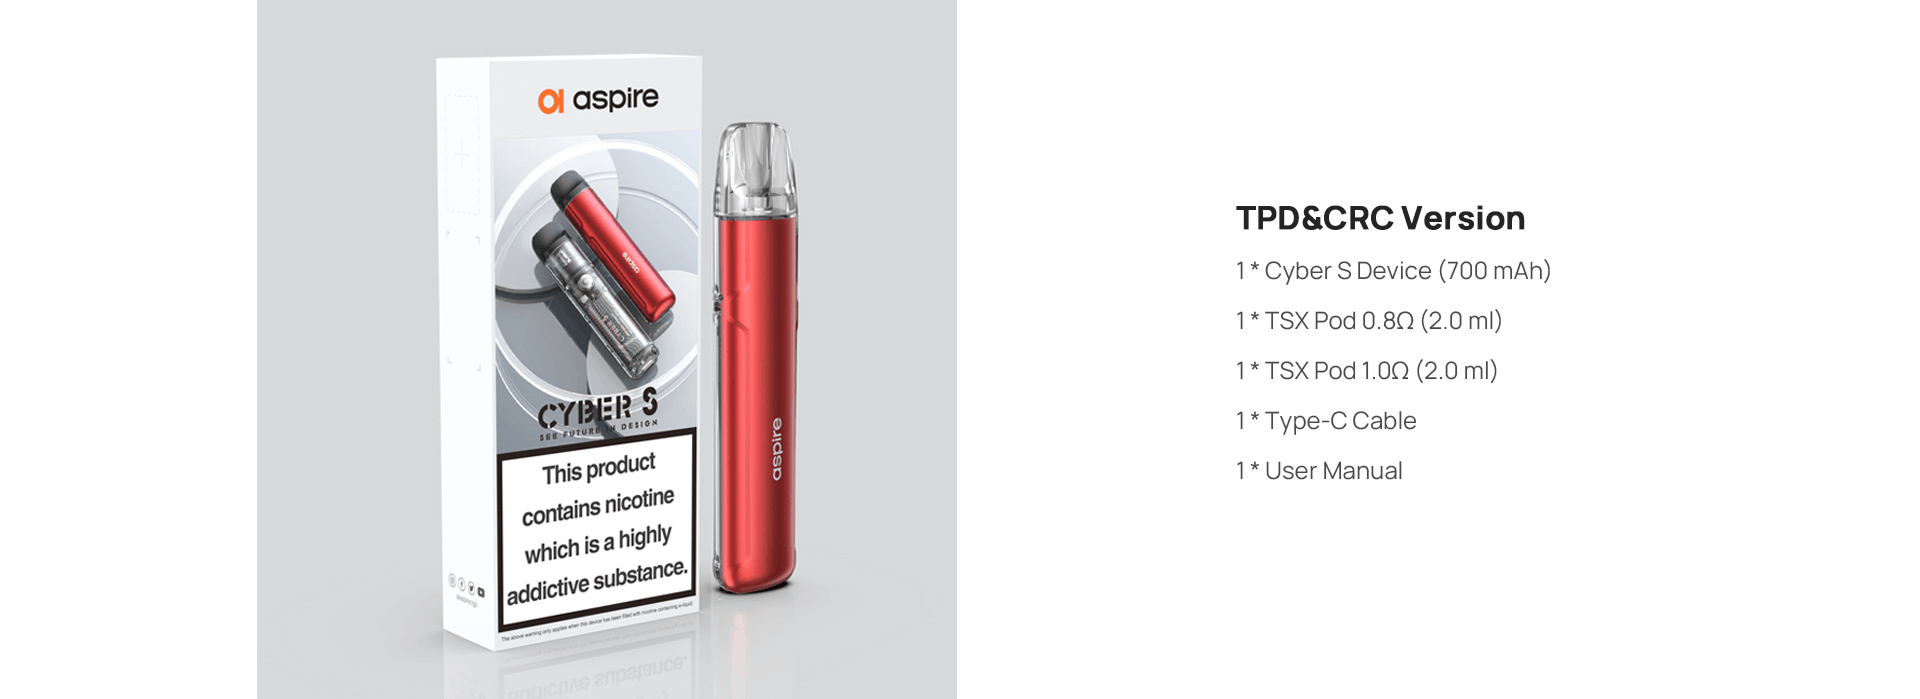 Aspire Cyber S TPD version - what's in the box?